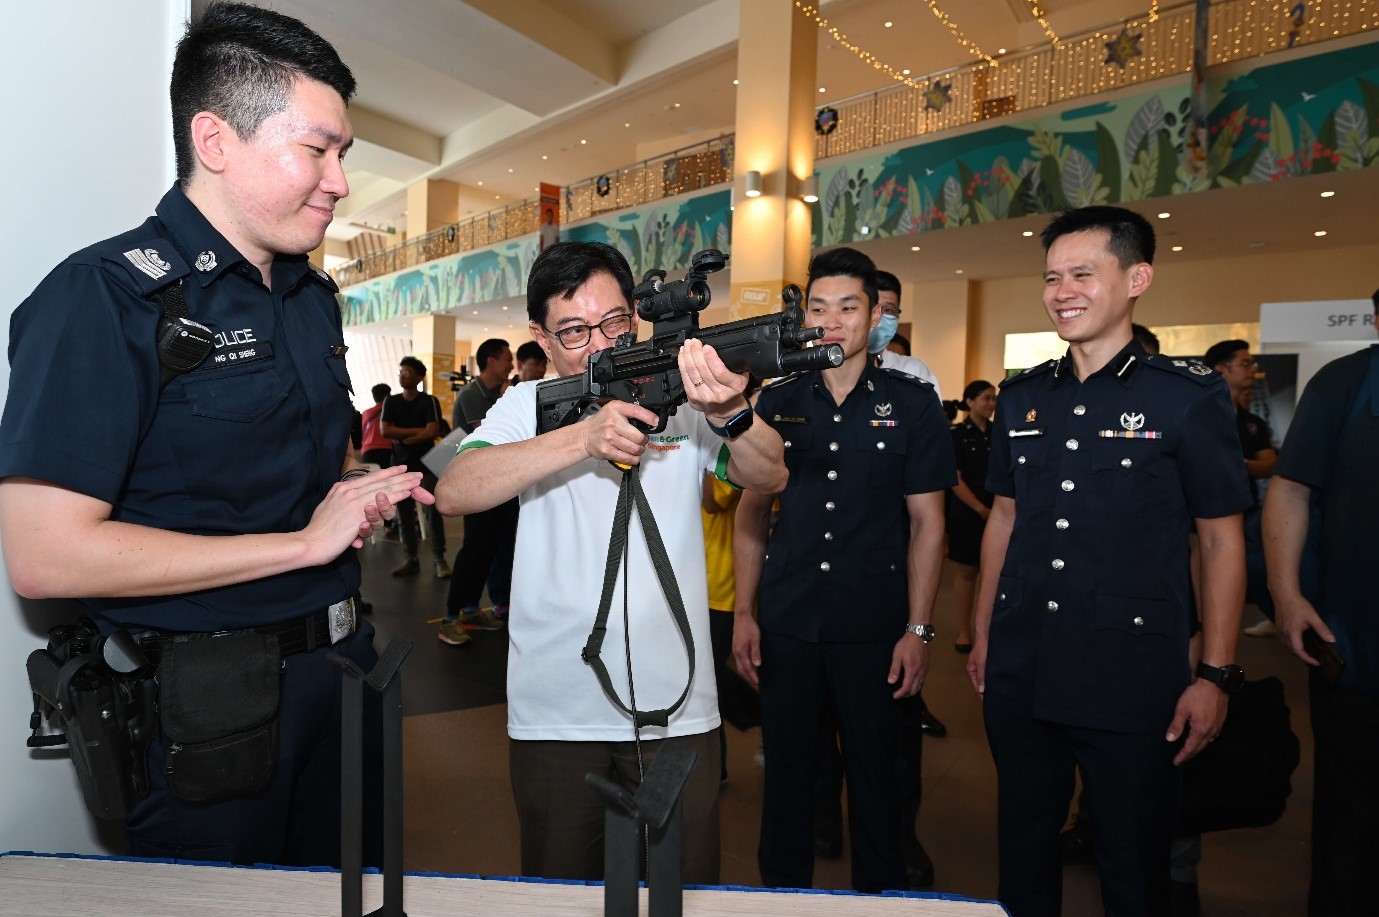 20221208_bedok_police_division_youth_carnival_2022_1